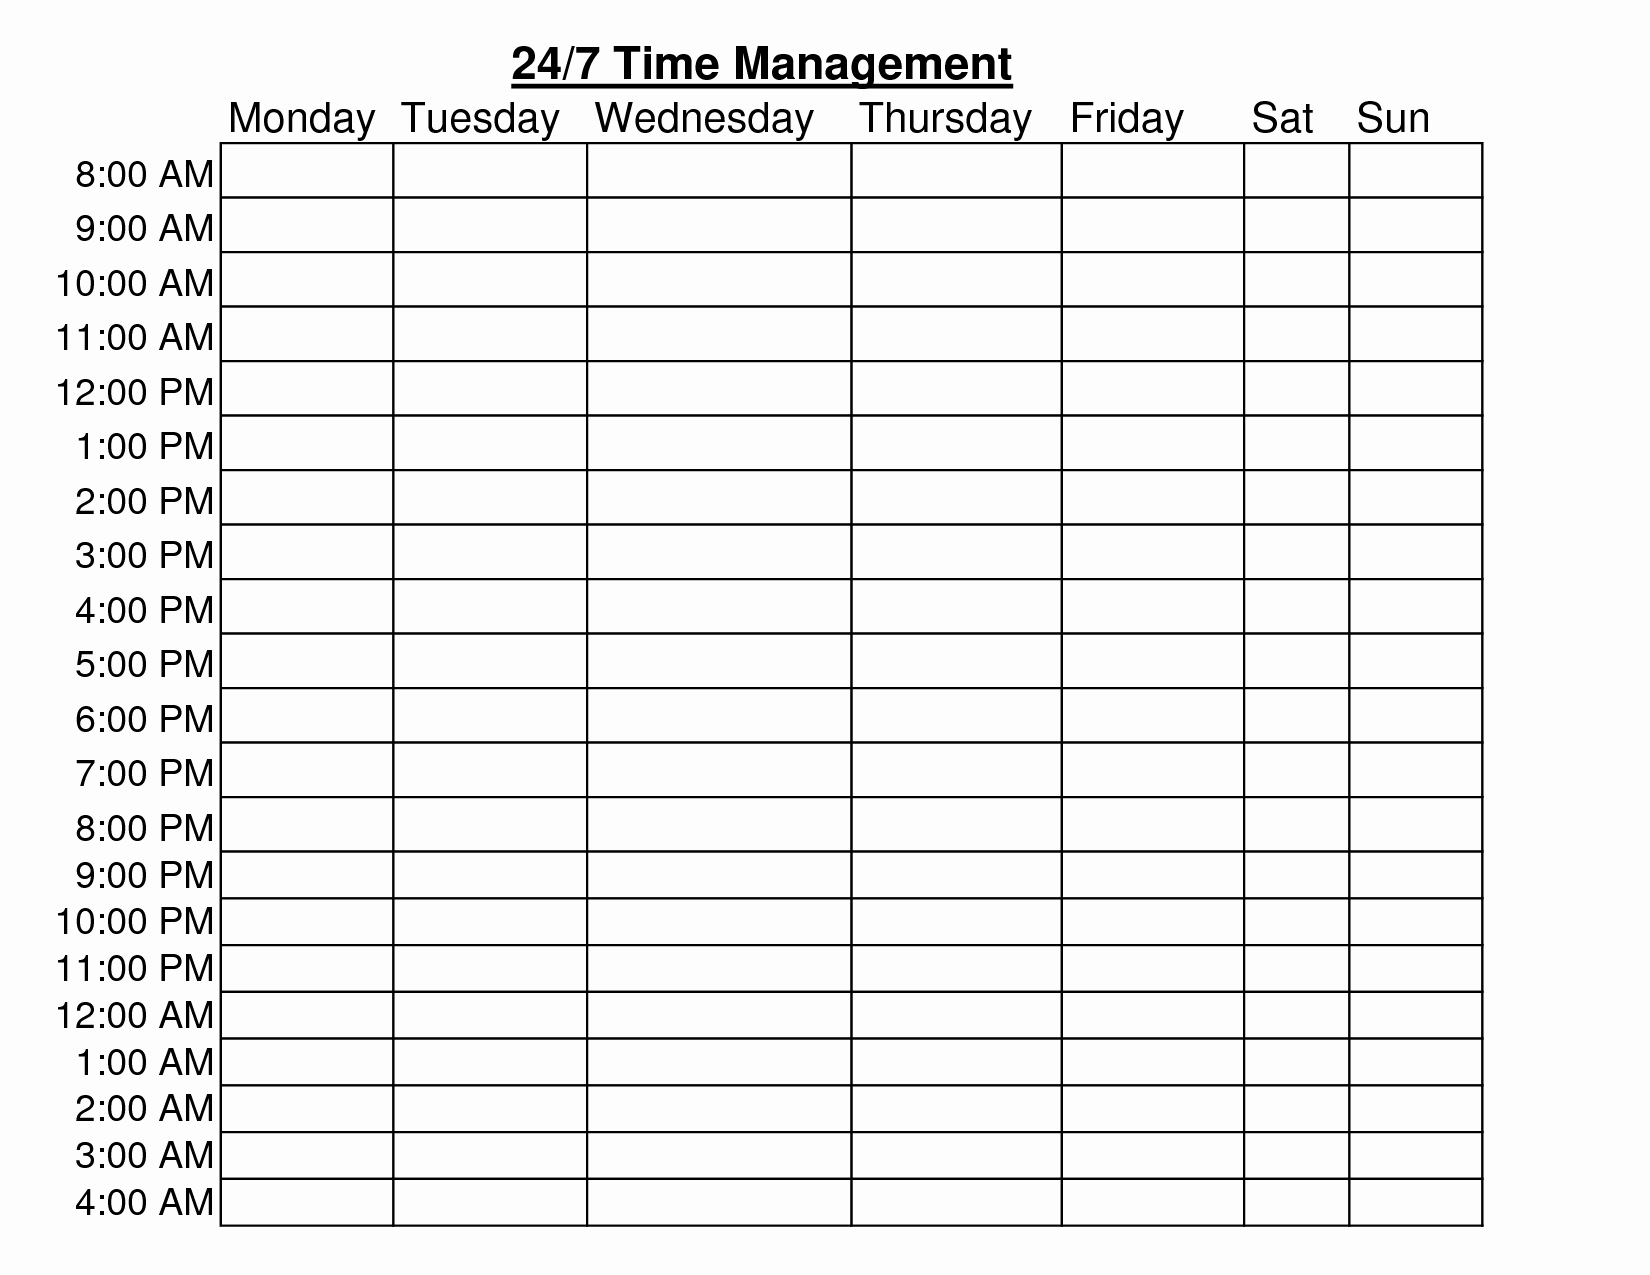 Time Management Sheet Pdf Legal 20 Elegant Rotating Schedule And Time Management Sheets Template